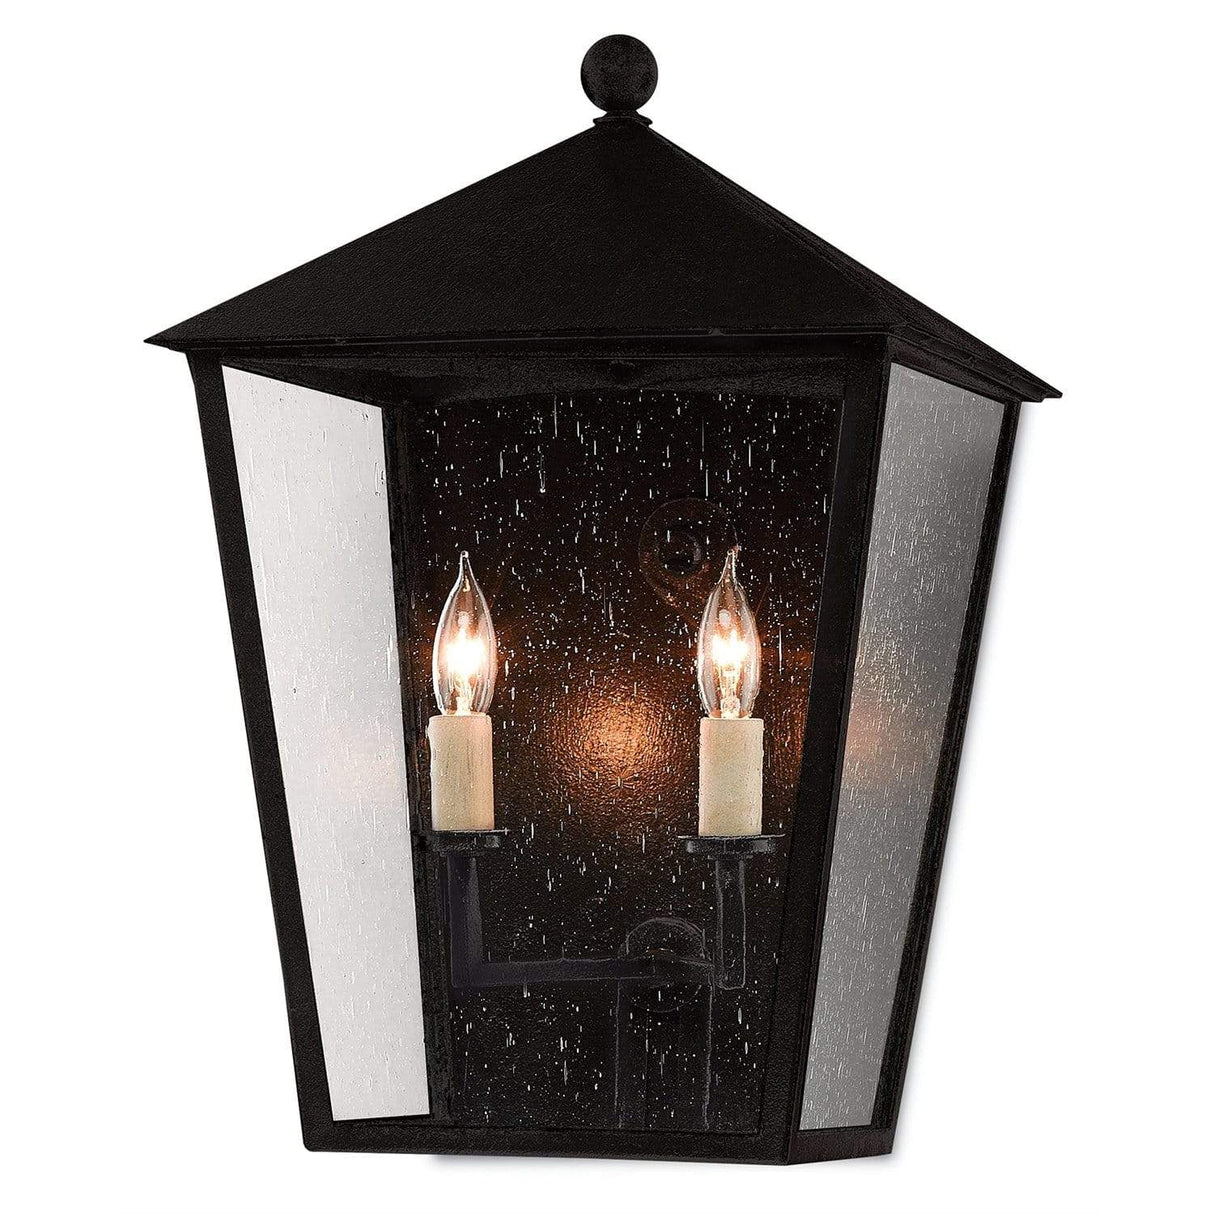 Currey and Company Bening Outdoor Wall Sconce Lighting